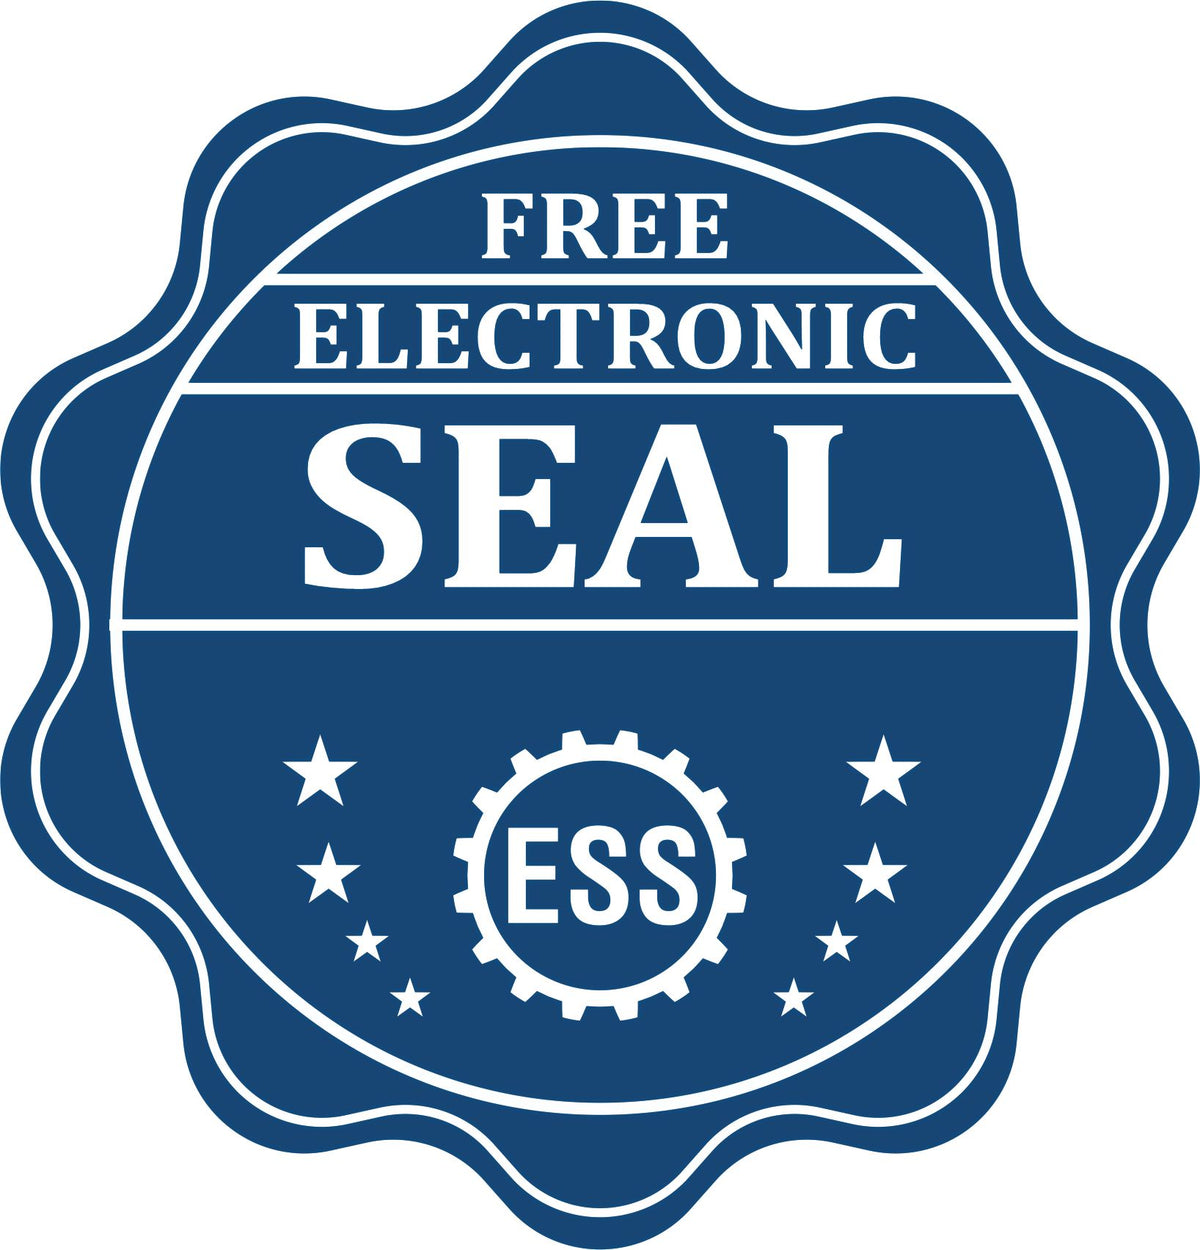 A badge showing a free electronic seal for the State of Ohio Extended Long Reach Geologist Seal with stars and the ESS gear on the emblem.